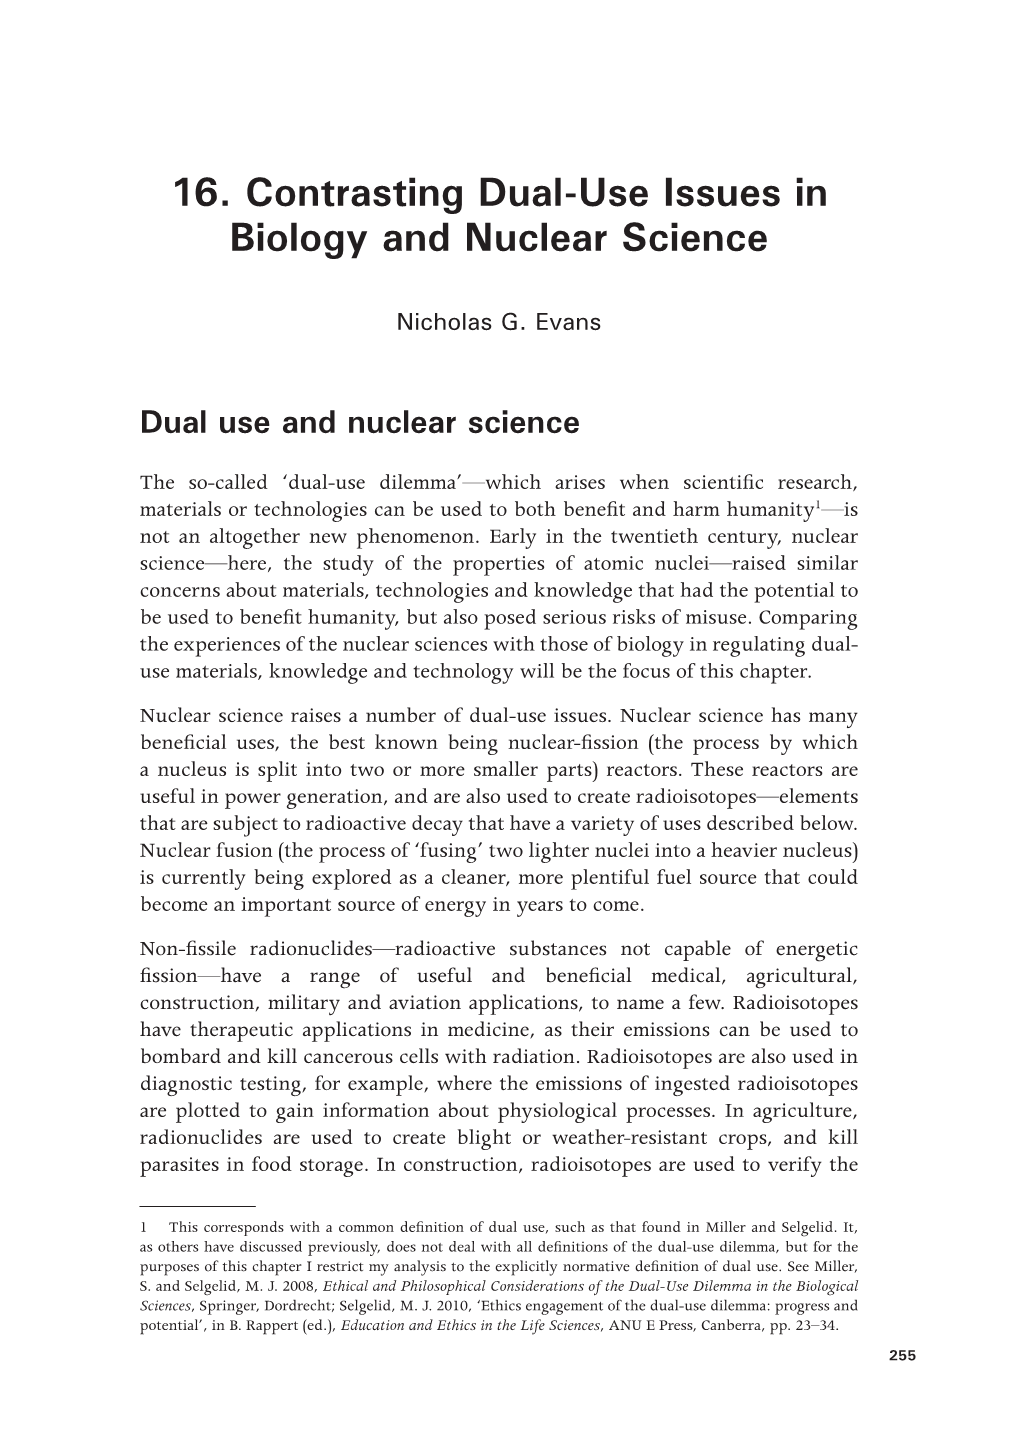 16. Contrasting Dual-Use Issues in Biology and Nuclear Science